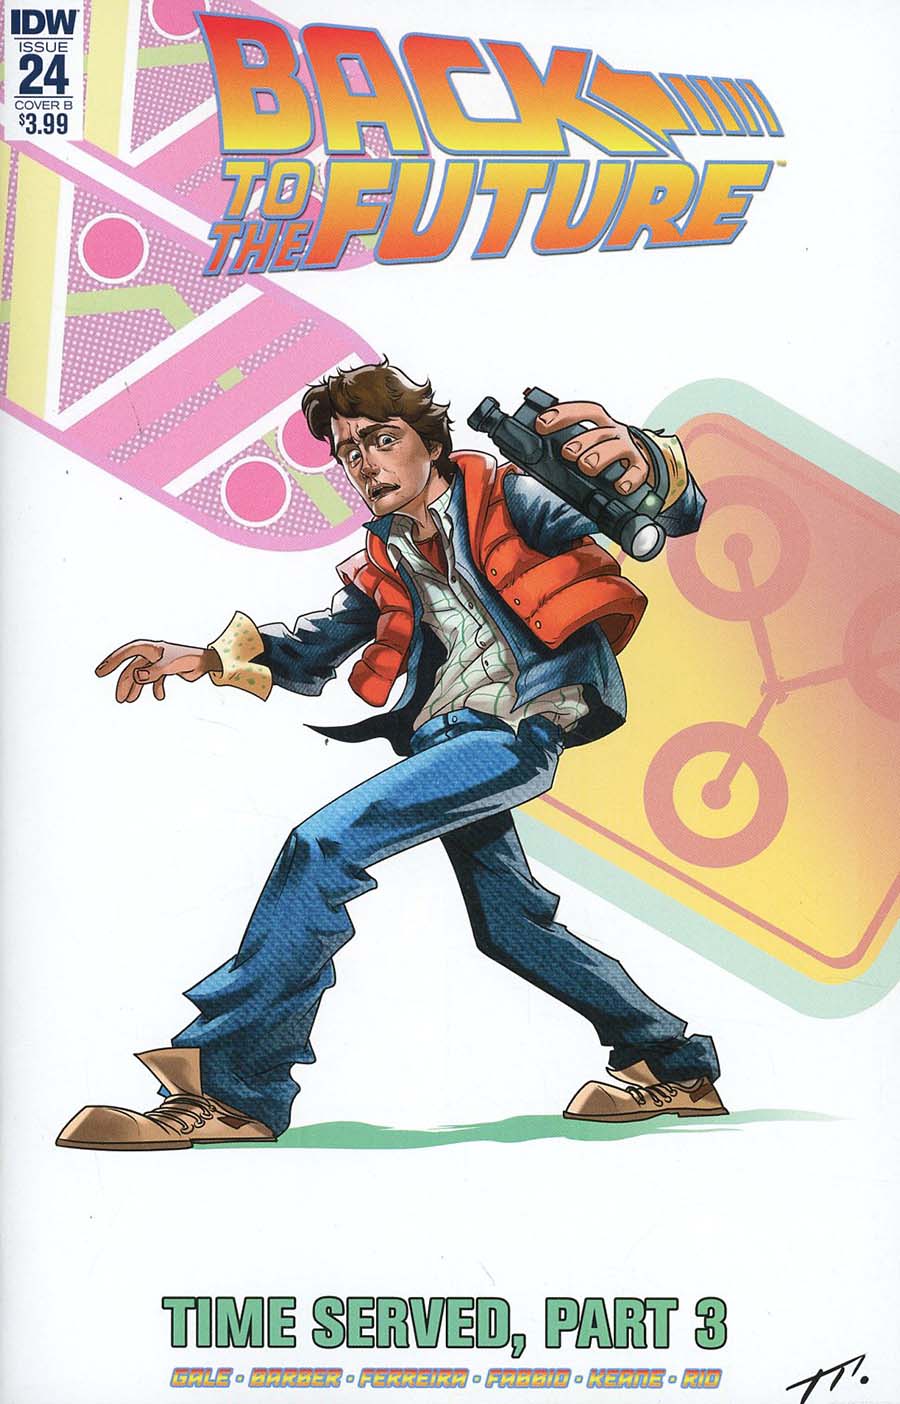 Back To The Future Vol 2 #24 Cover B Variant Xavi Montell Cover